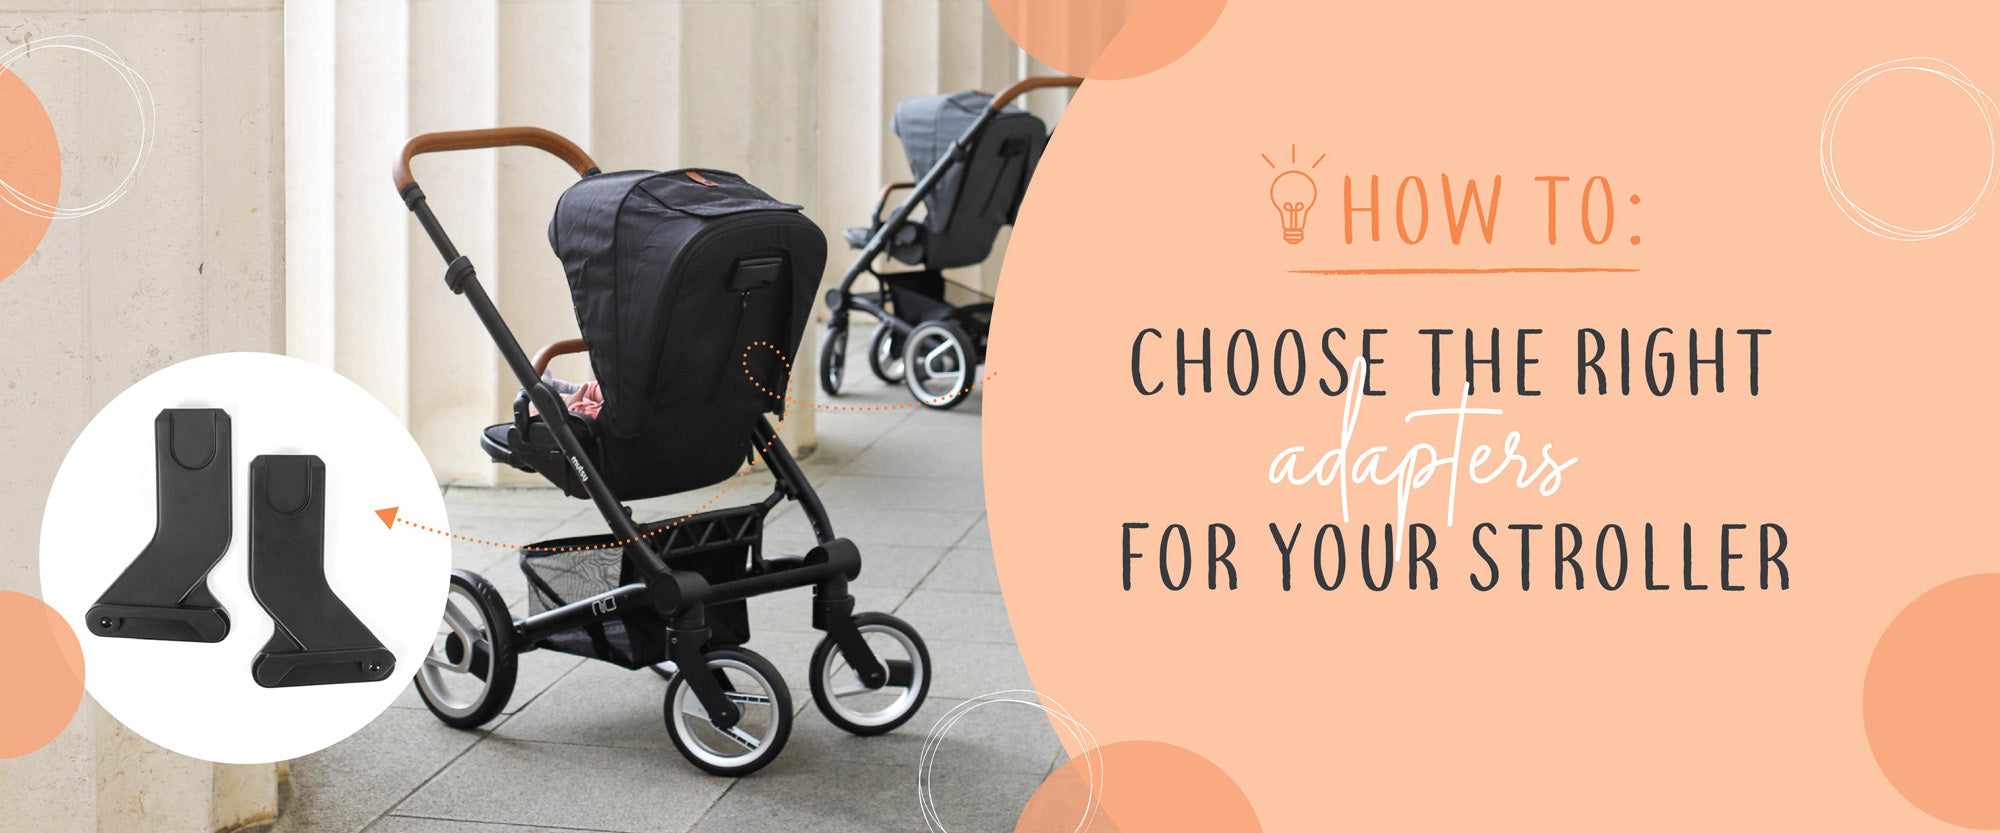 How to choose the right adapters for your stroller